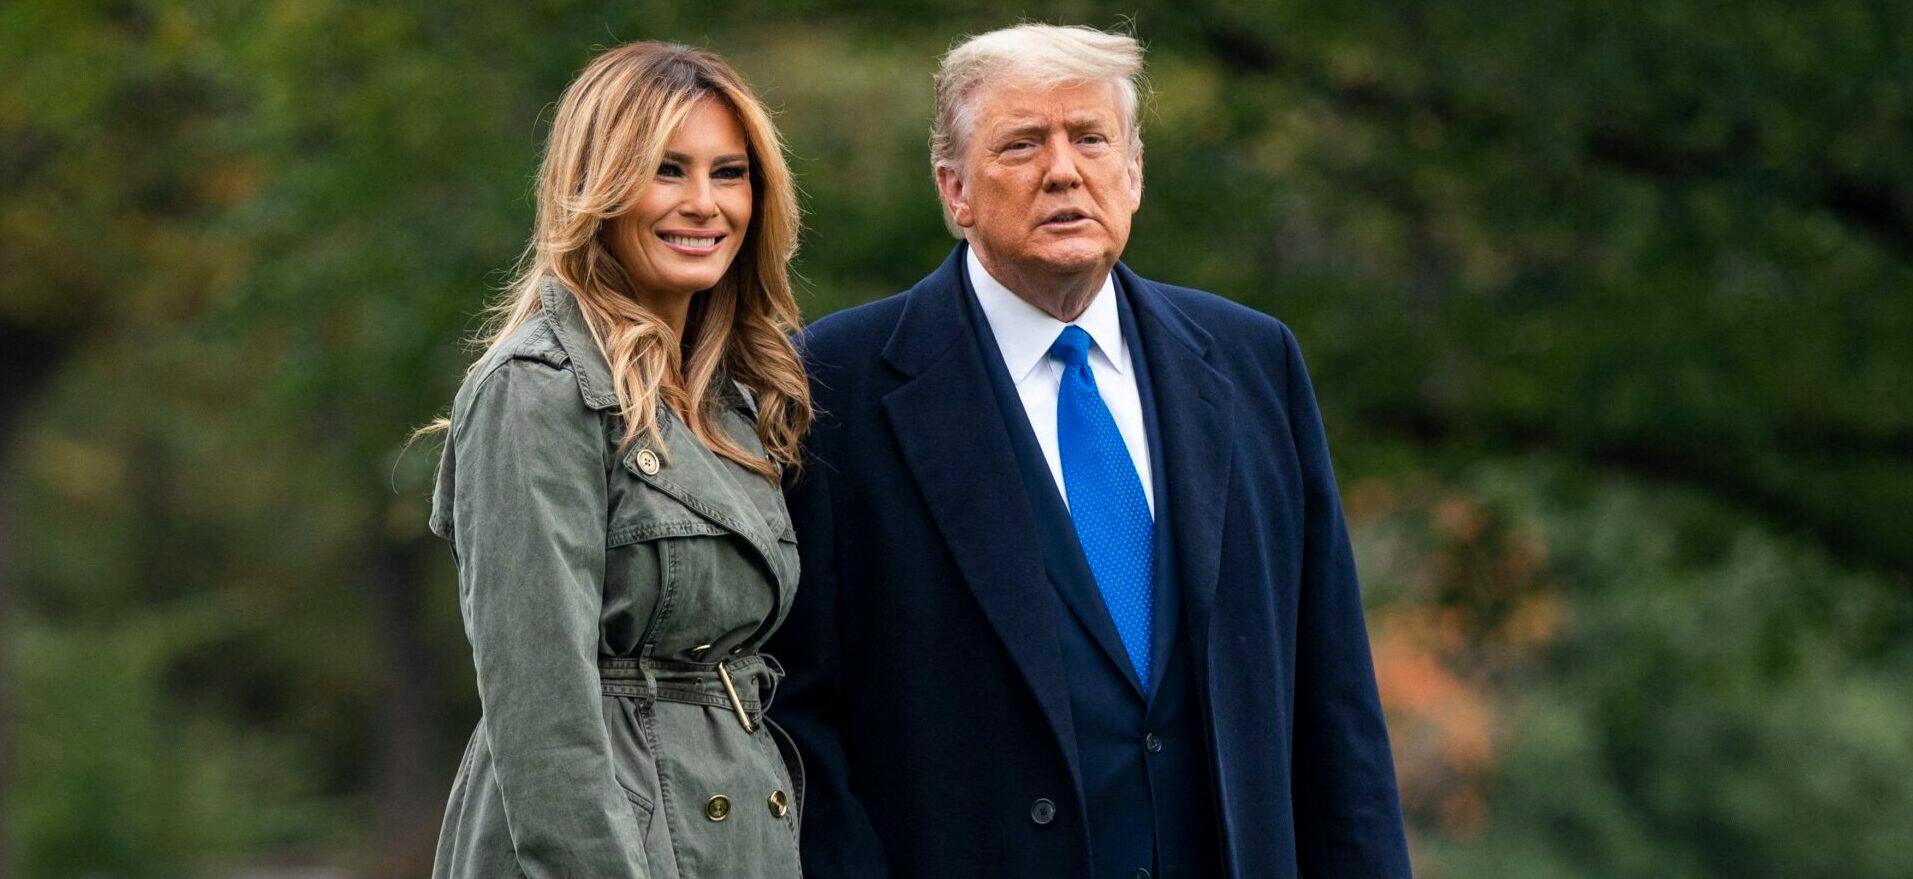 Donald Trump Reveals Wife Melania’s Blunt Remark After He ‘Struggled’ To Exit A Stage At A Rally